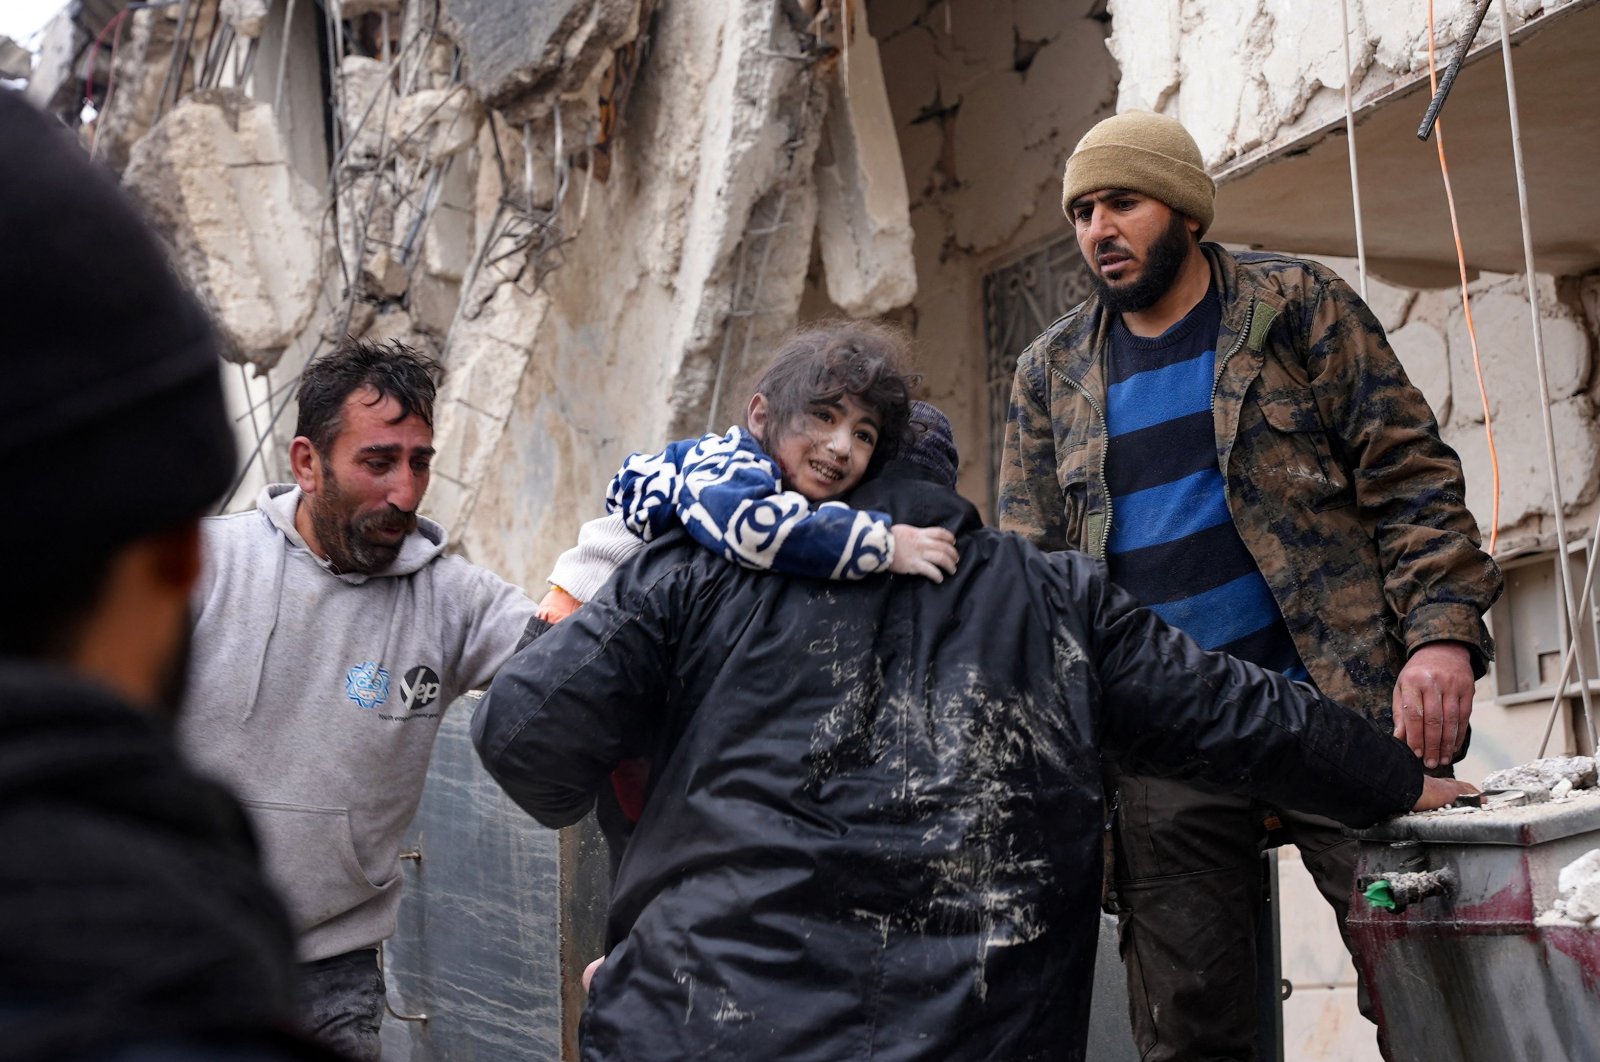 Residents retrieve a small child from the rubble of a collapsed building following an earthquake in the town of Jandaris, northwestern Syria, Feb. 6, 2023. (AFP Photo)